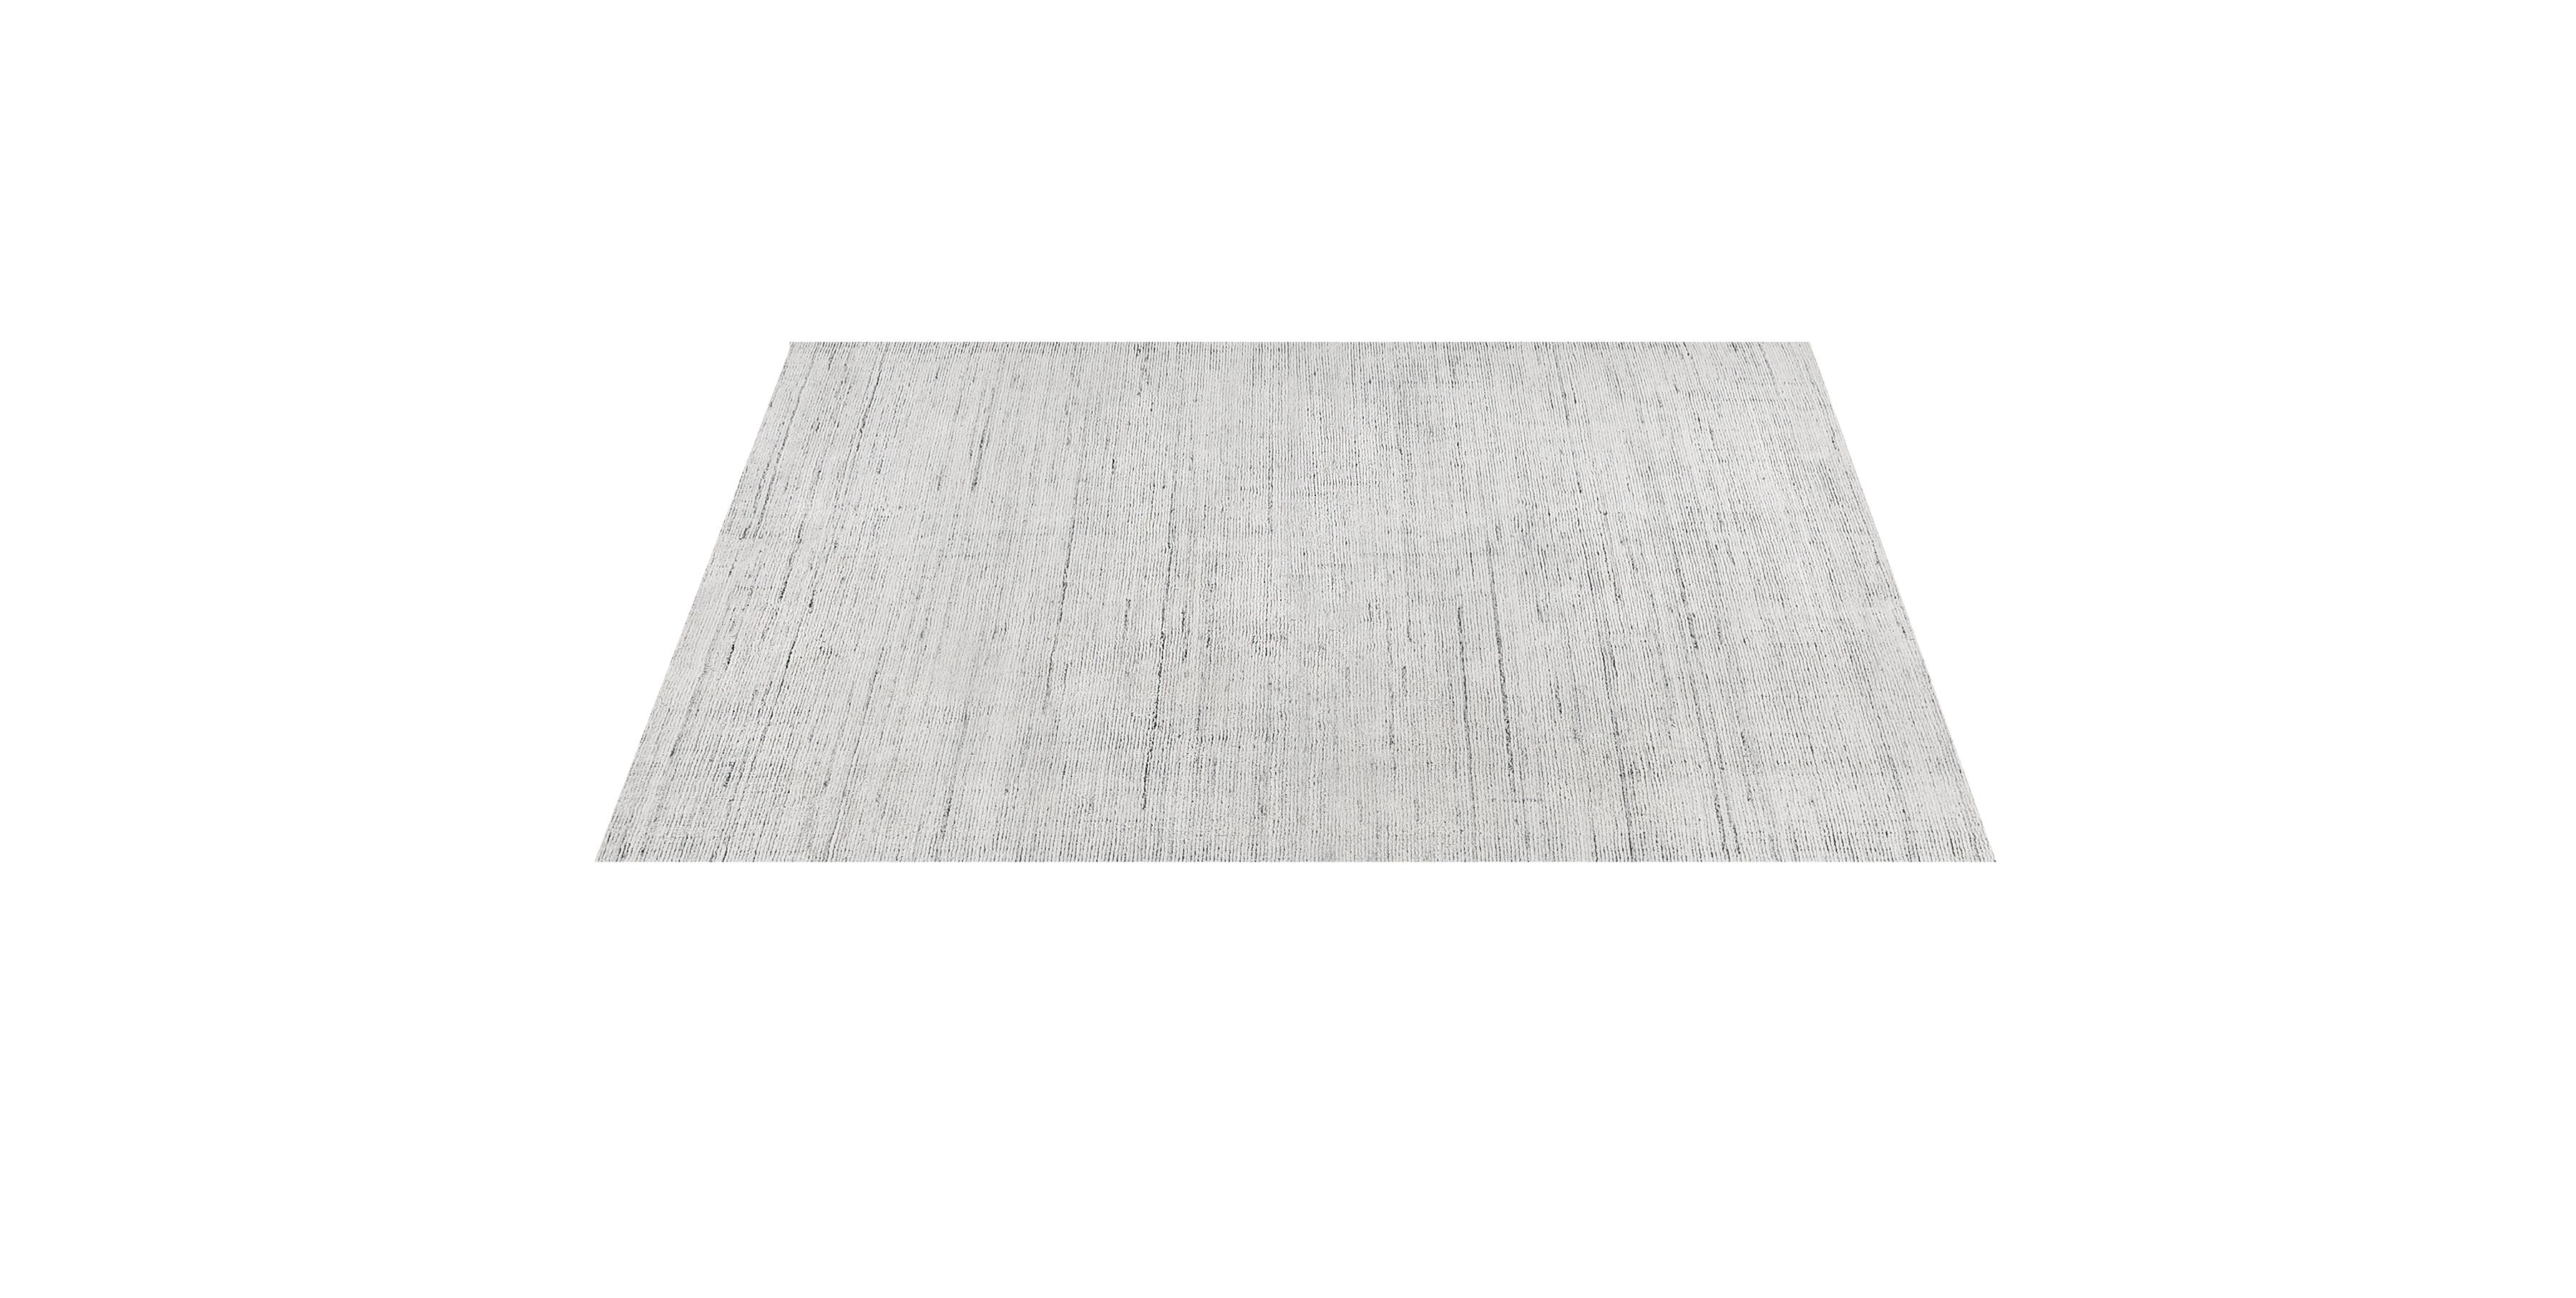 For Sale: Beige (Performance Distressed Natural) Ben Soleimani Performance Distressed Rug 8'x10' 4